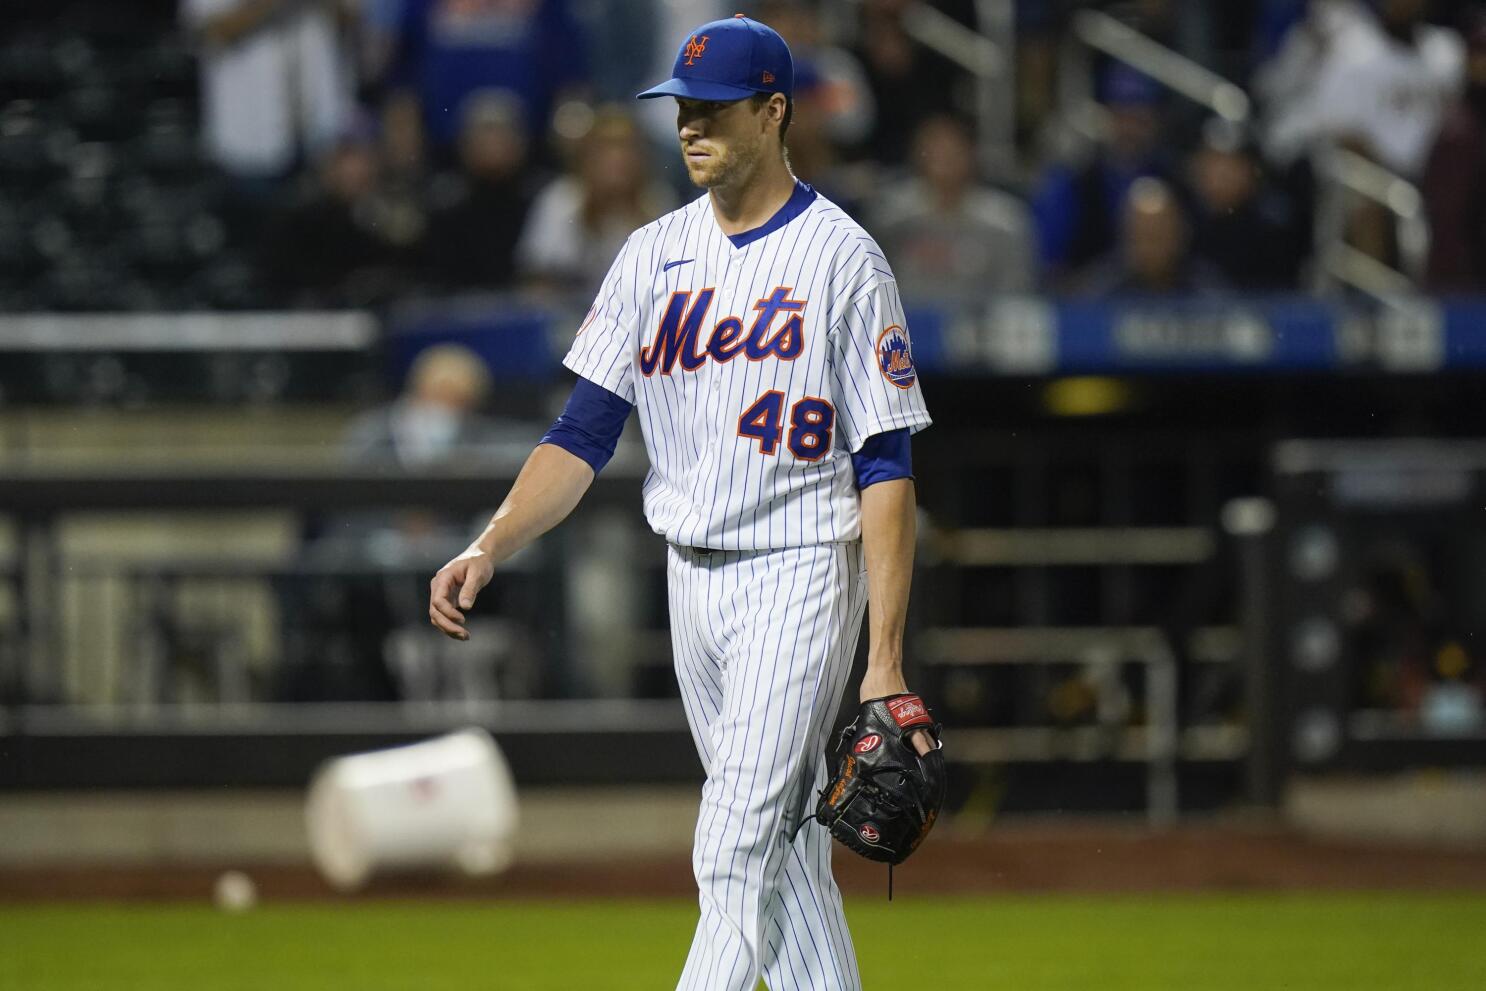 Jacob deGrom dominant again as Mets open road trip with win over